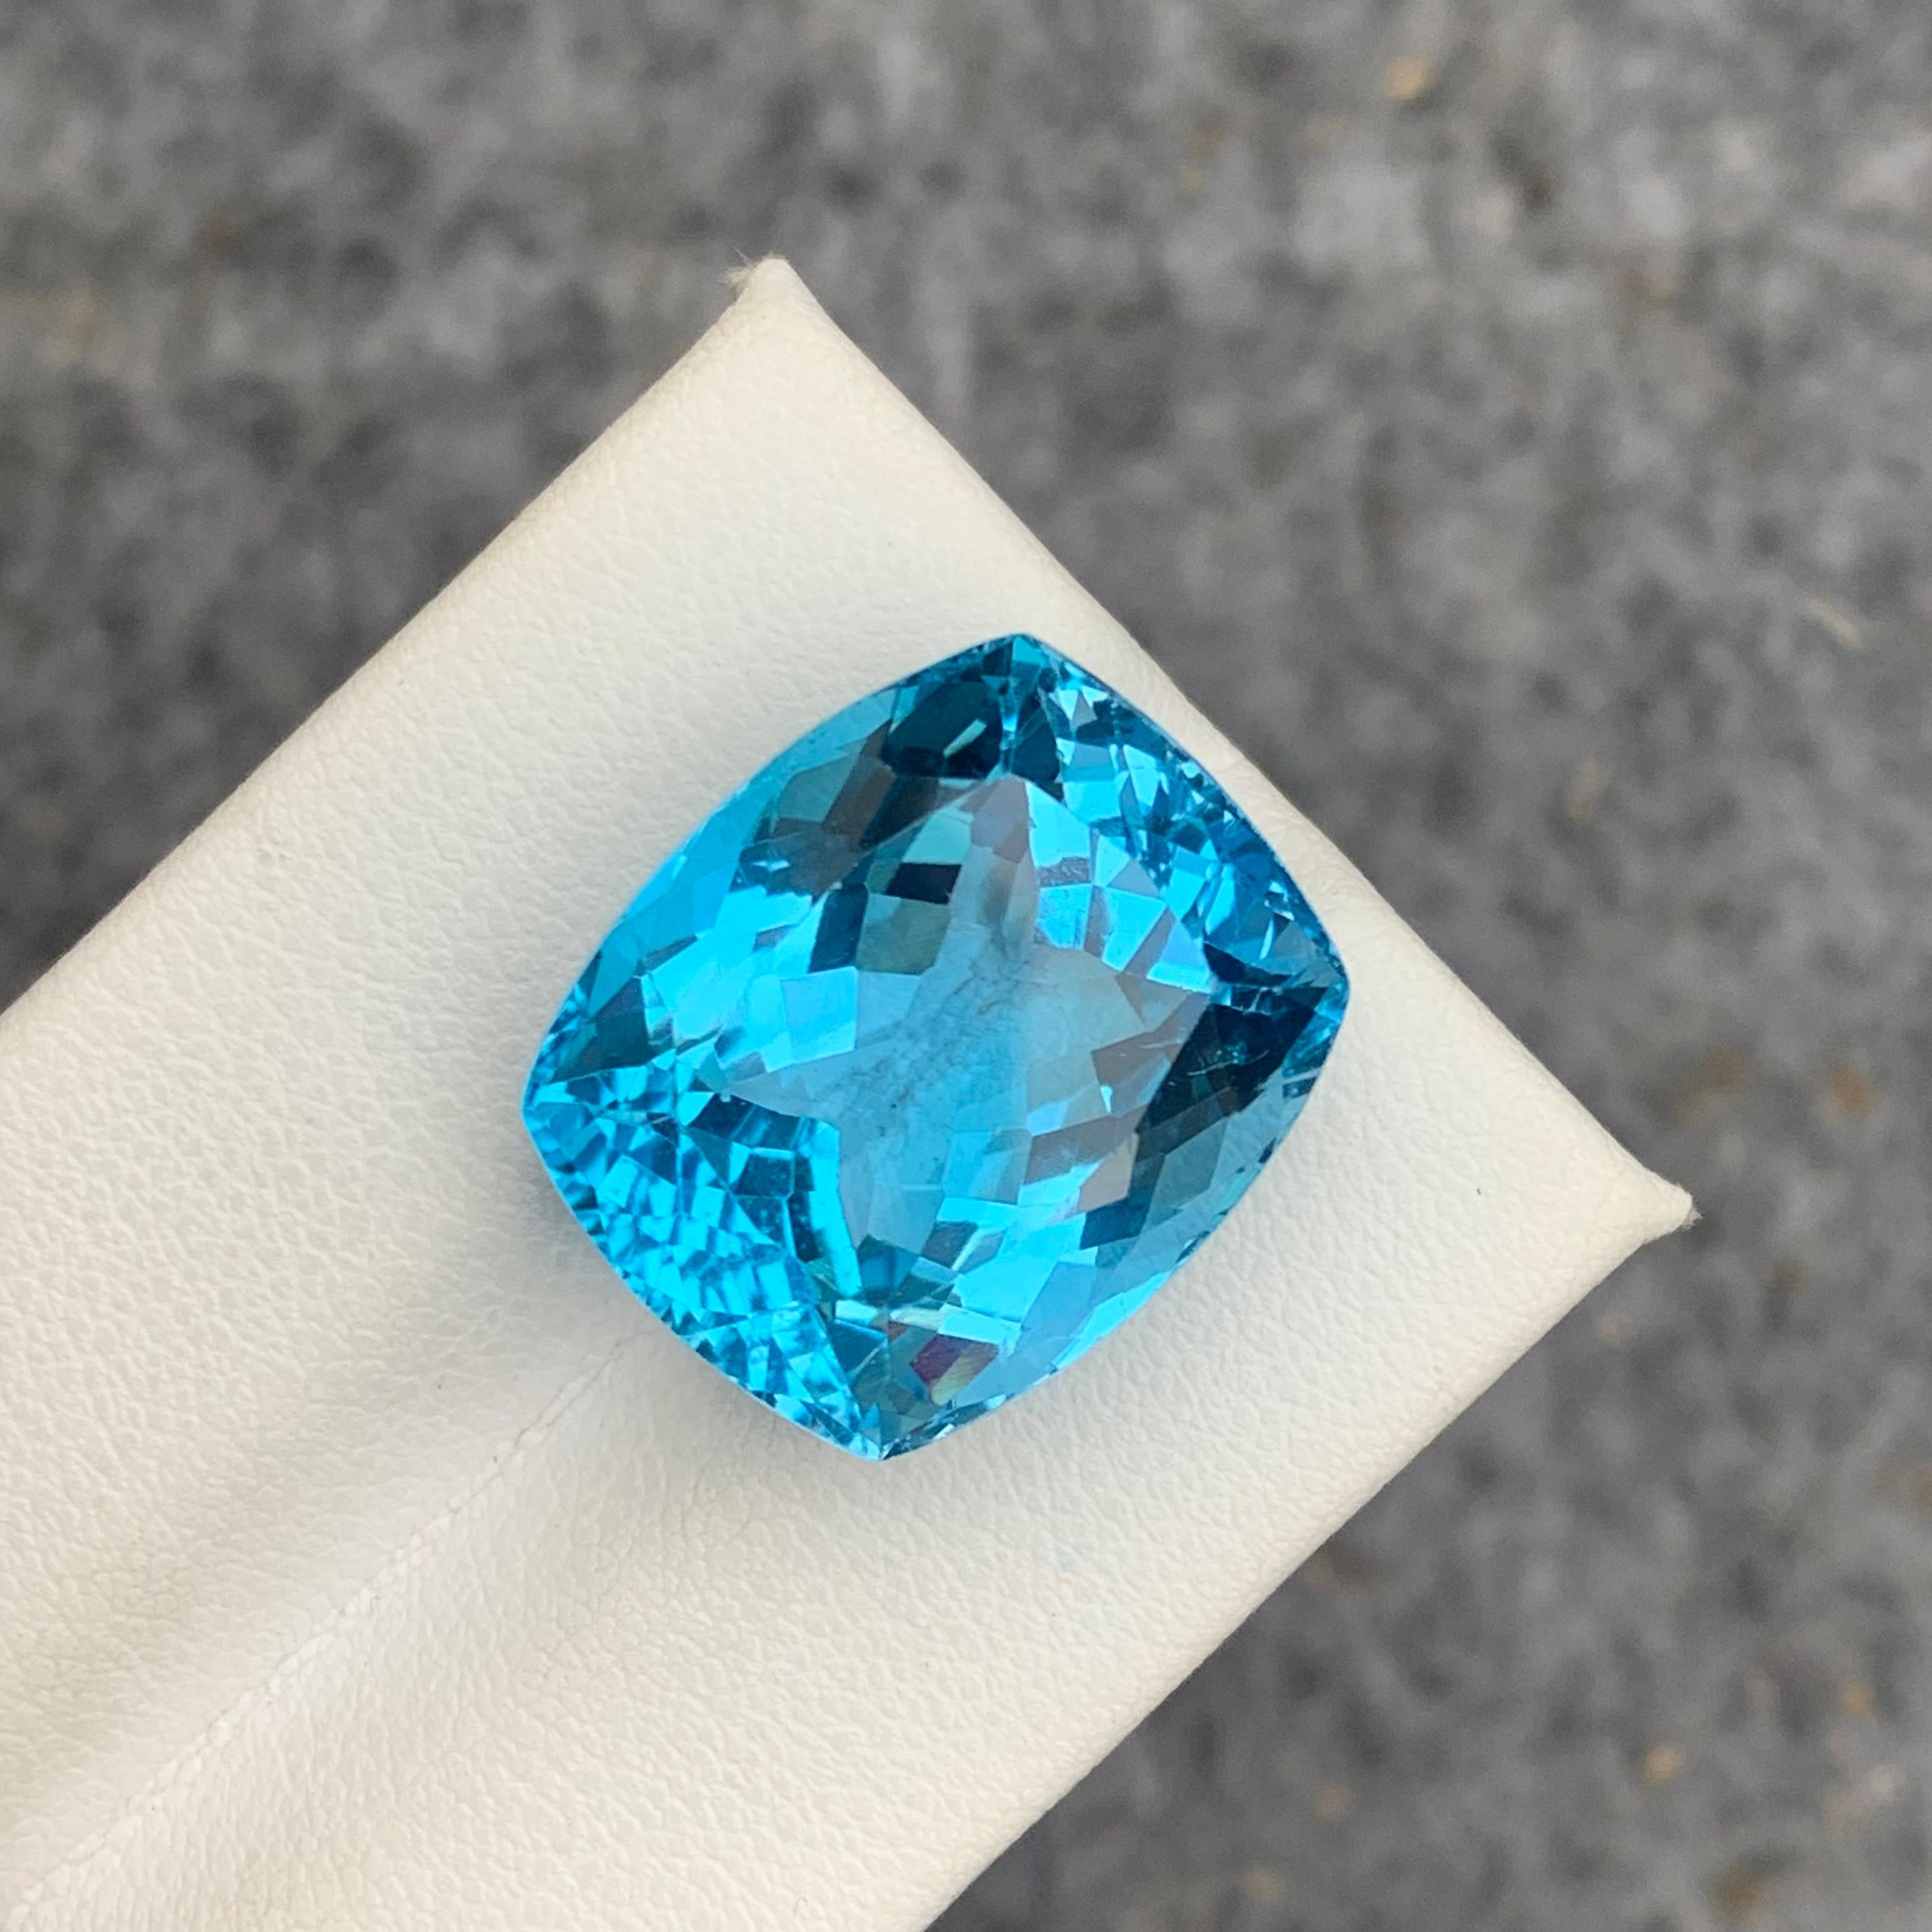 Gorgeous 31.10 Carat Loose Blue Topaz from Brazil Long Cushion Cut for Jewelry 5